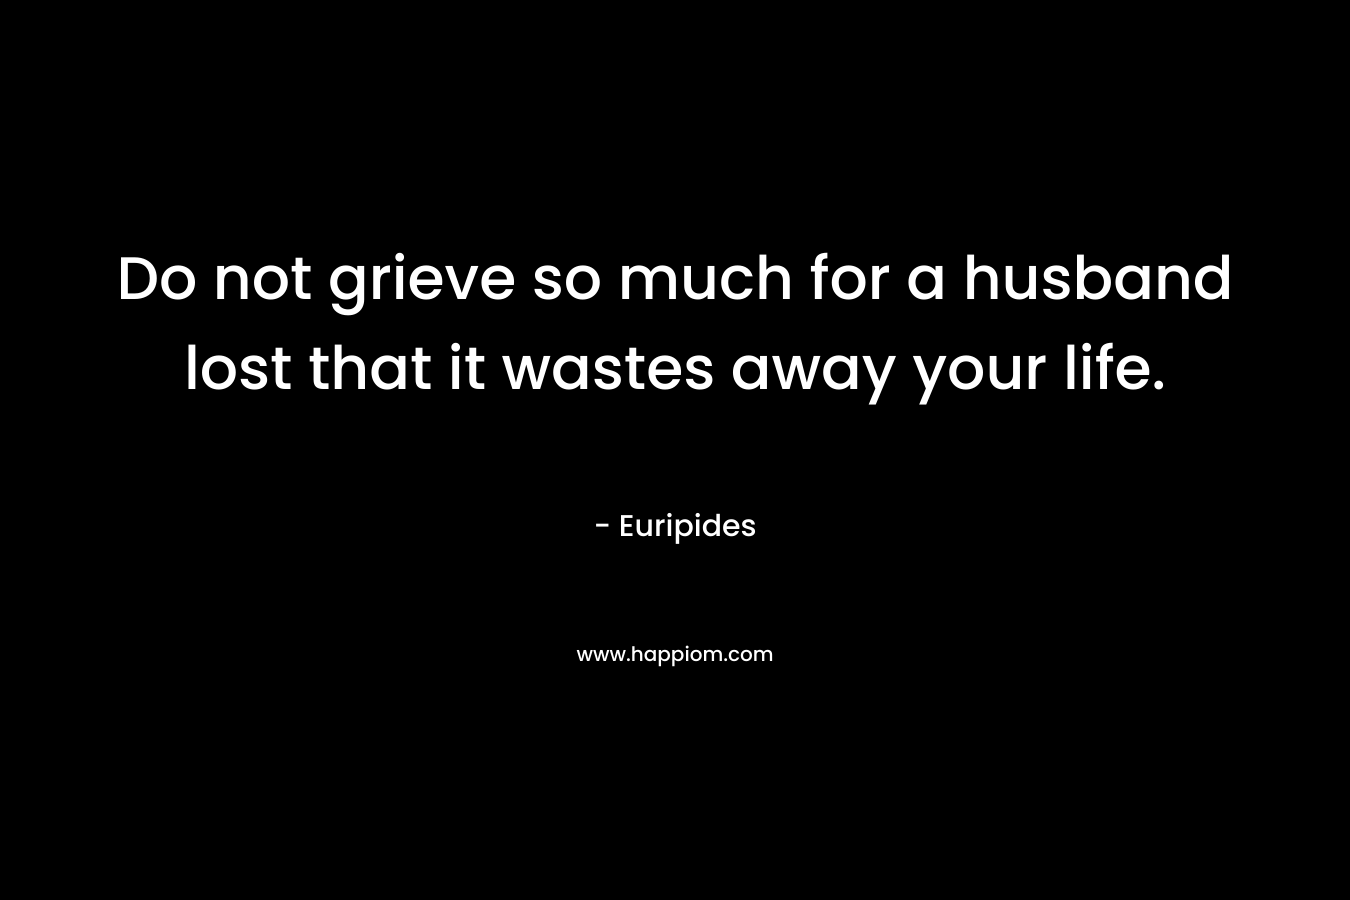 Do not grieve so much for a husband lost that it wastes away your life. – Euripides